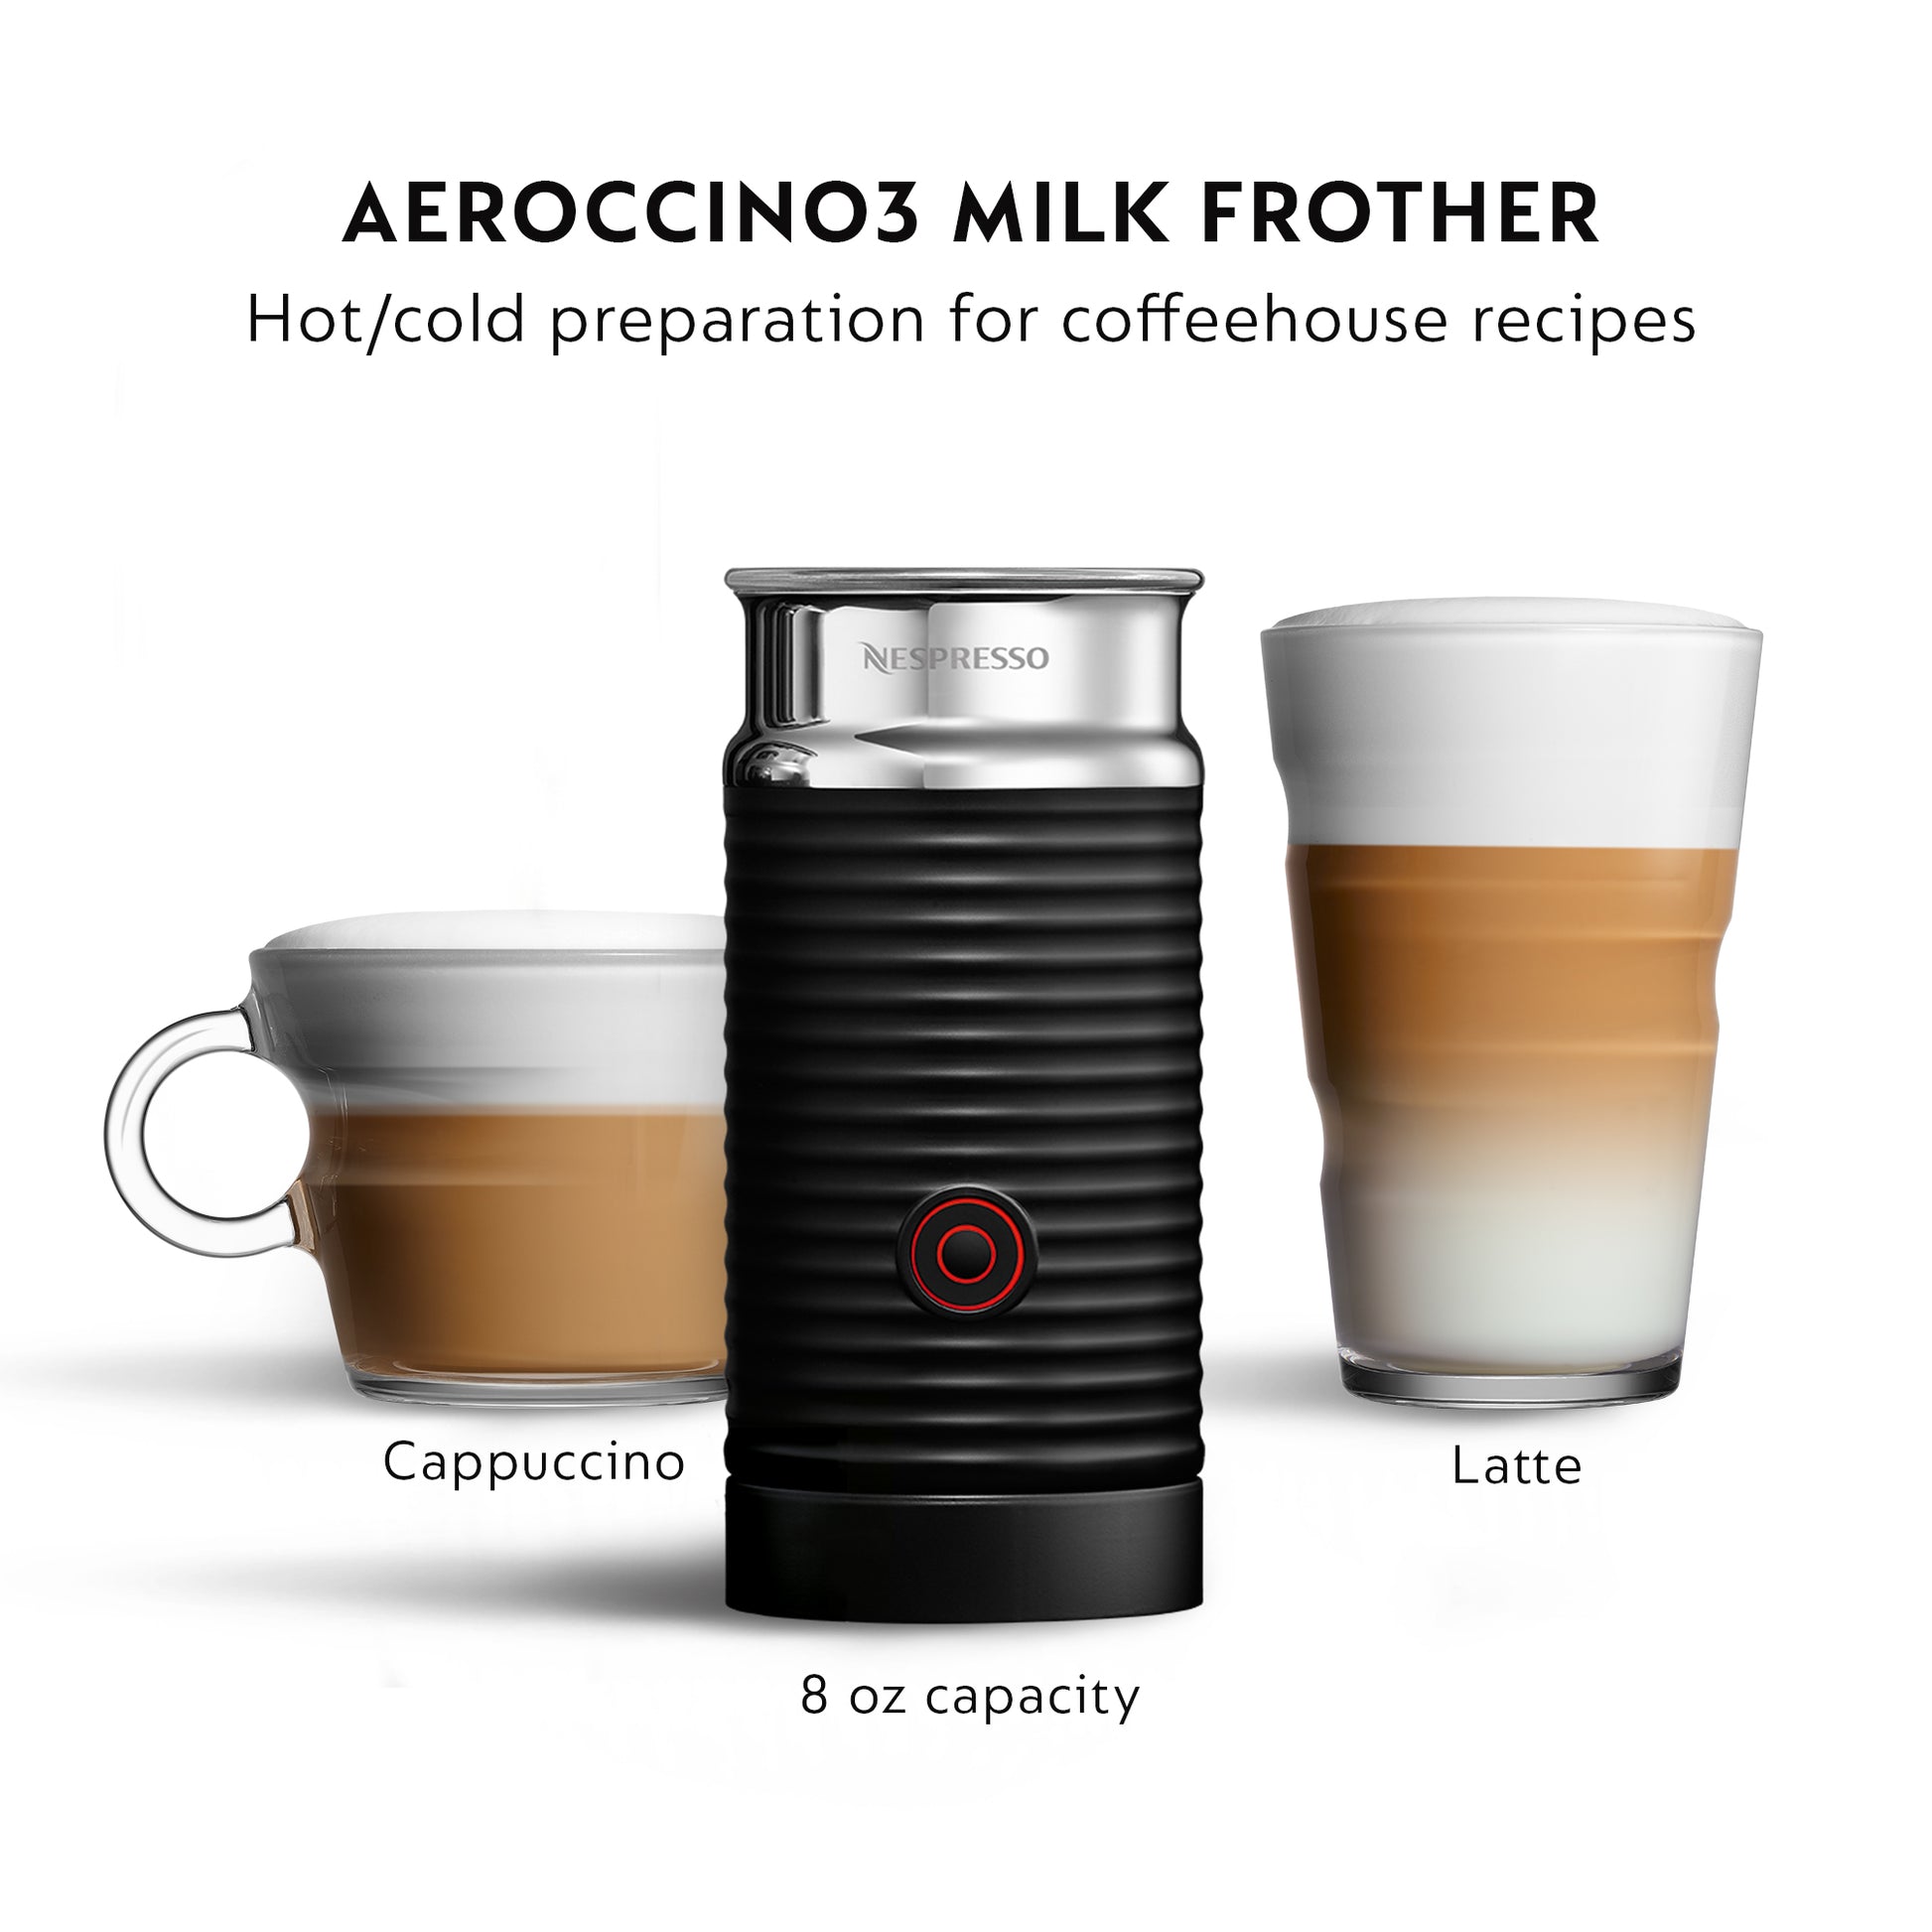 10 Nespresso Aeroccino 3 Tips and Tricks  How to get the most out of your Nespresso  Milk Frother 